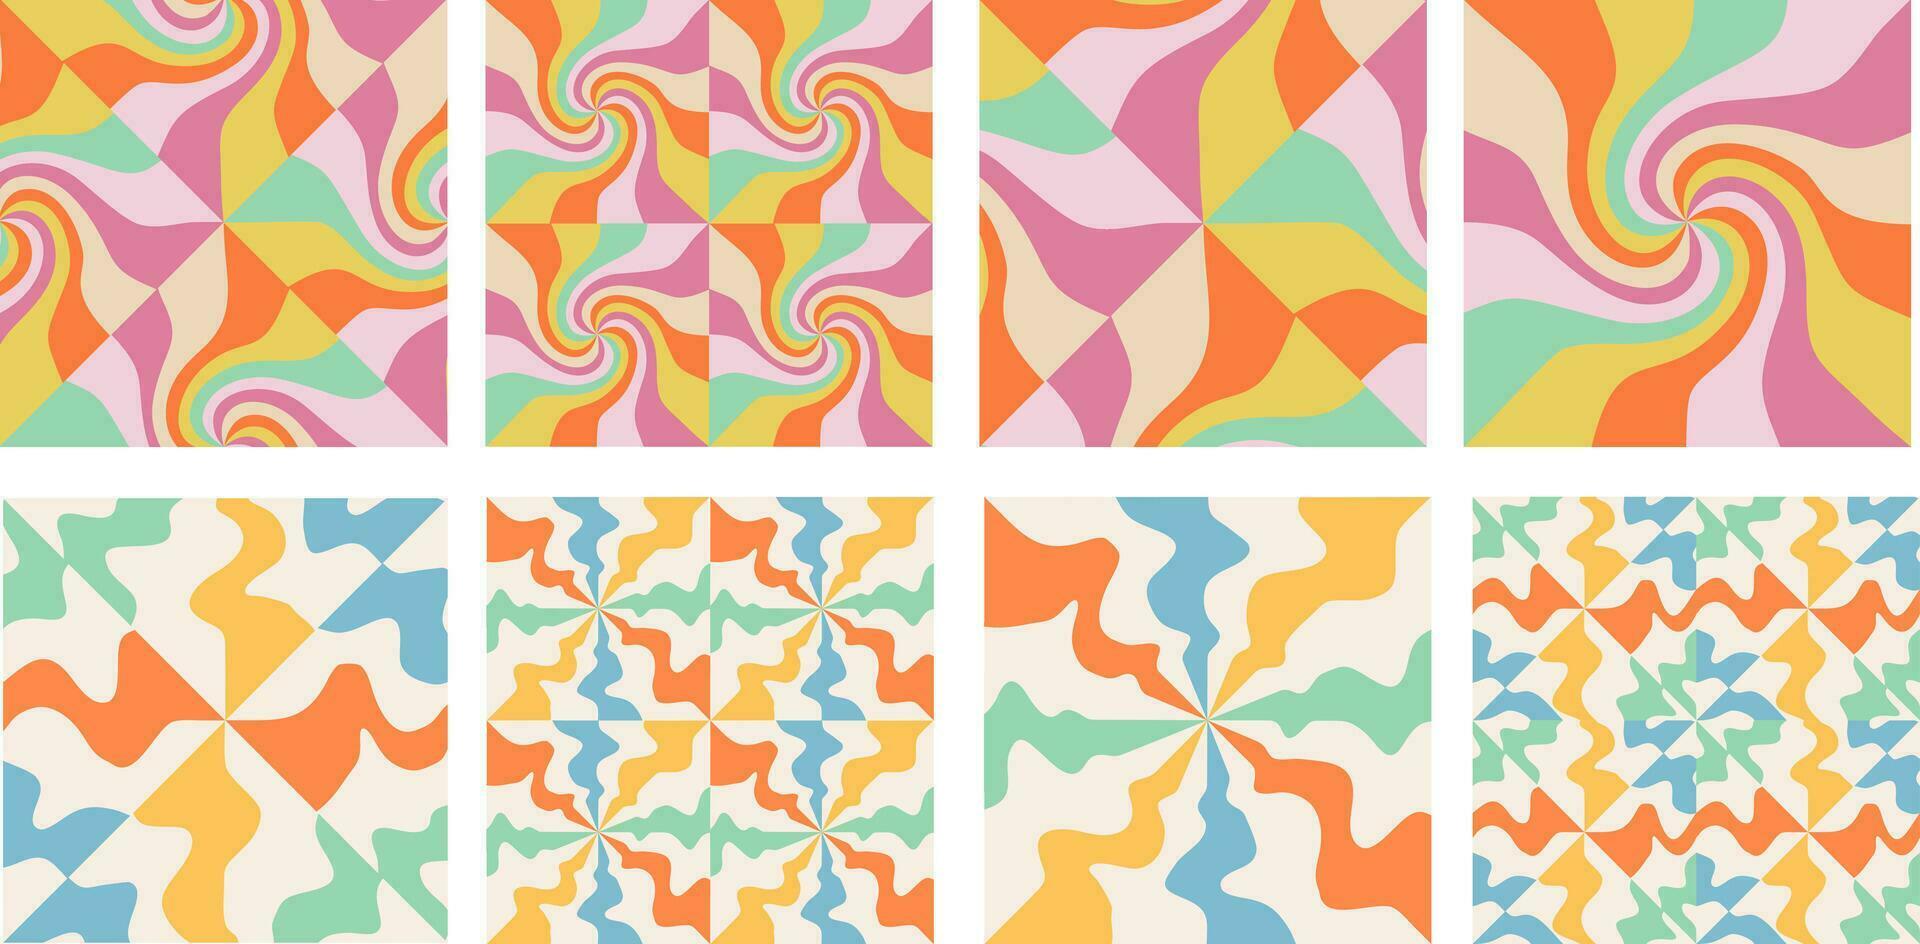 Retro background patterns in a spiral or swirl radial stripes design. Groovy poster y2k retro Vector